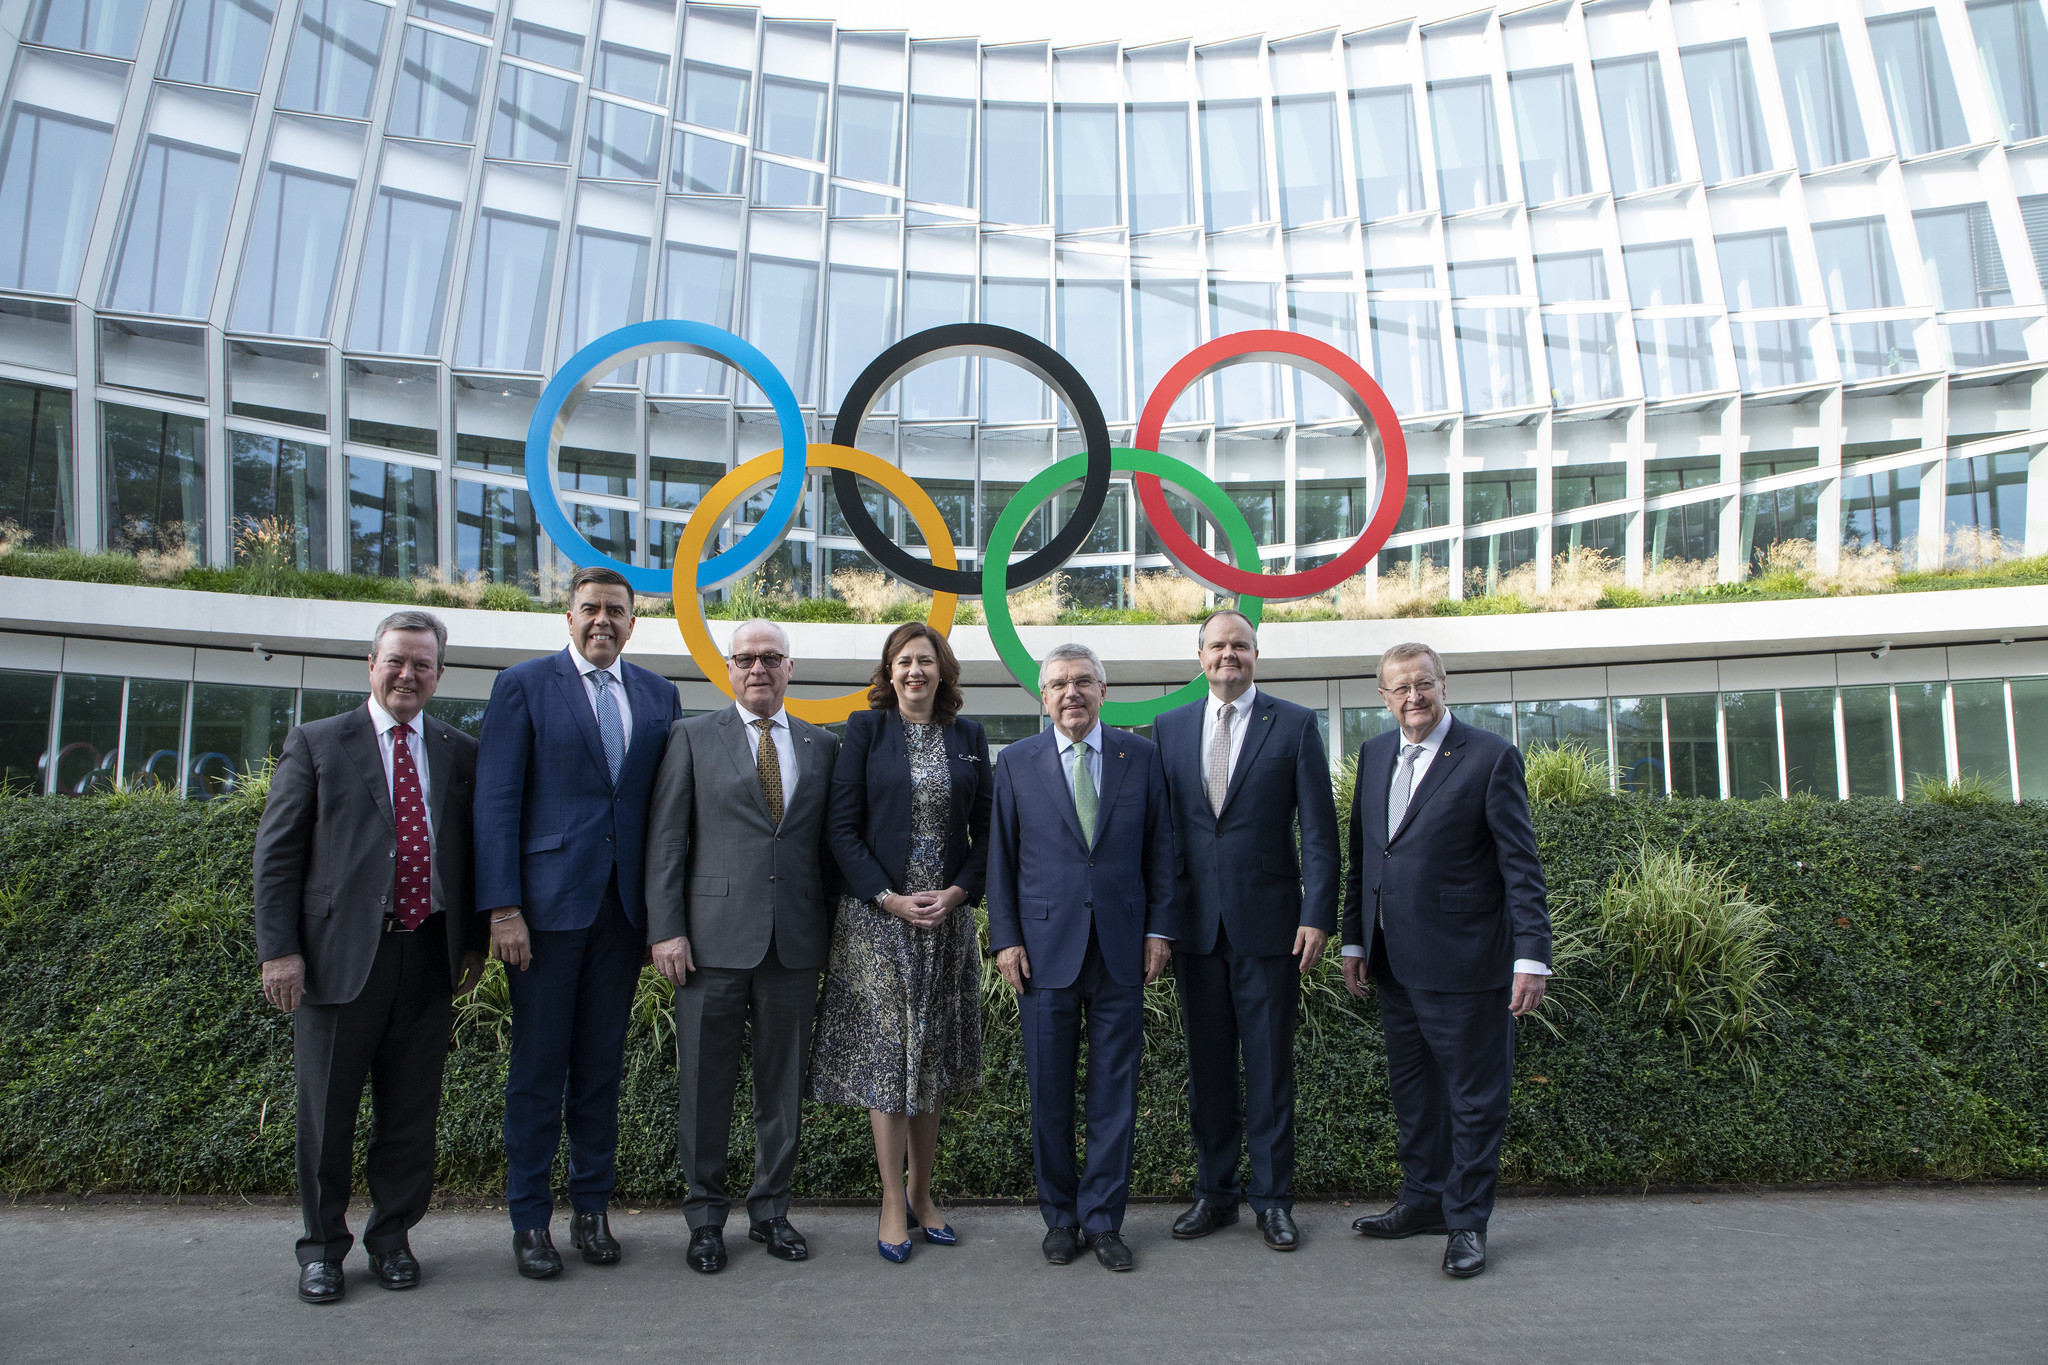 Annastacia Palaszczuk was part of a delegation that met IOC officials, including President Thomas Bach, third from right, in Lausanne last year ©IOC